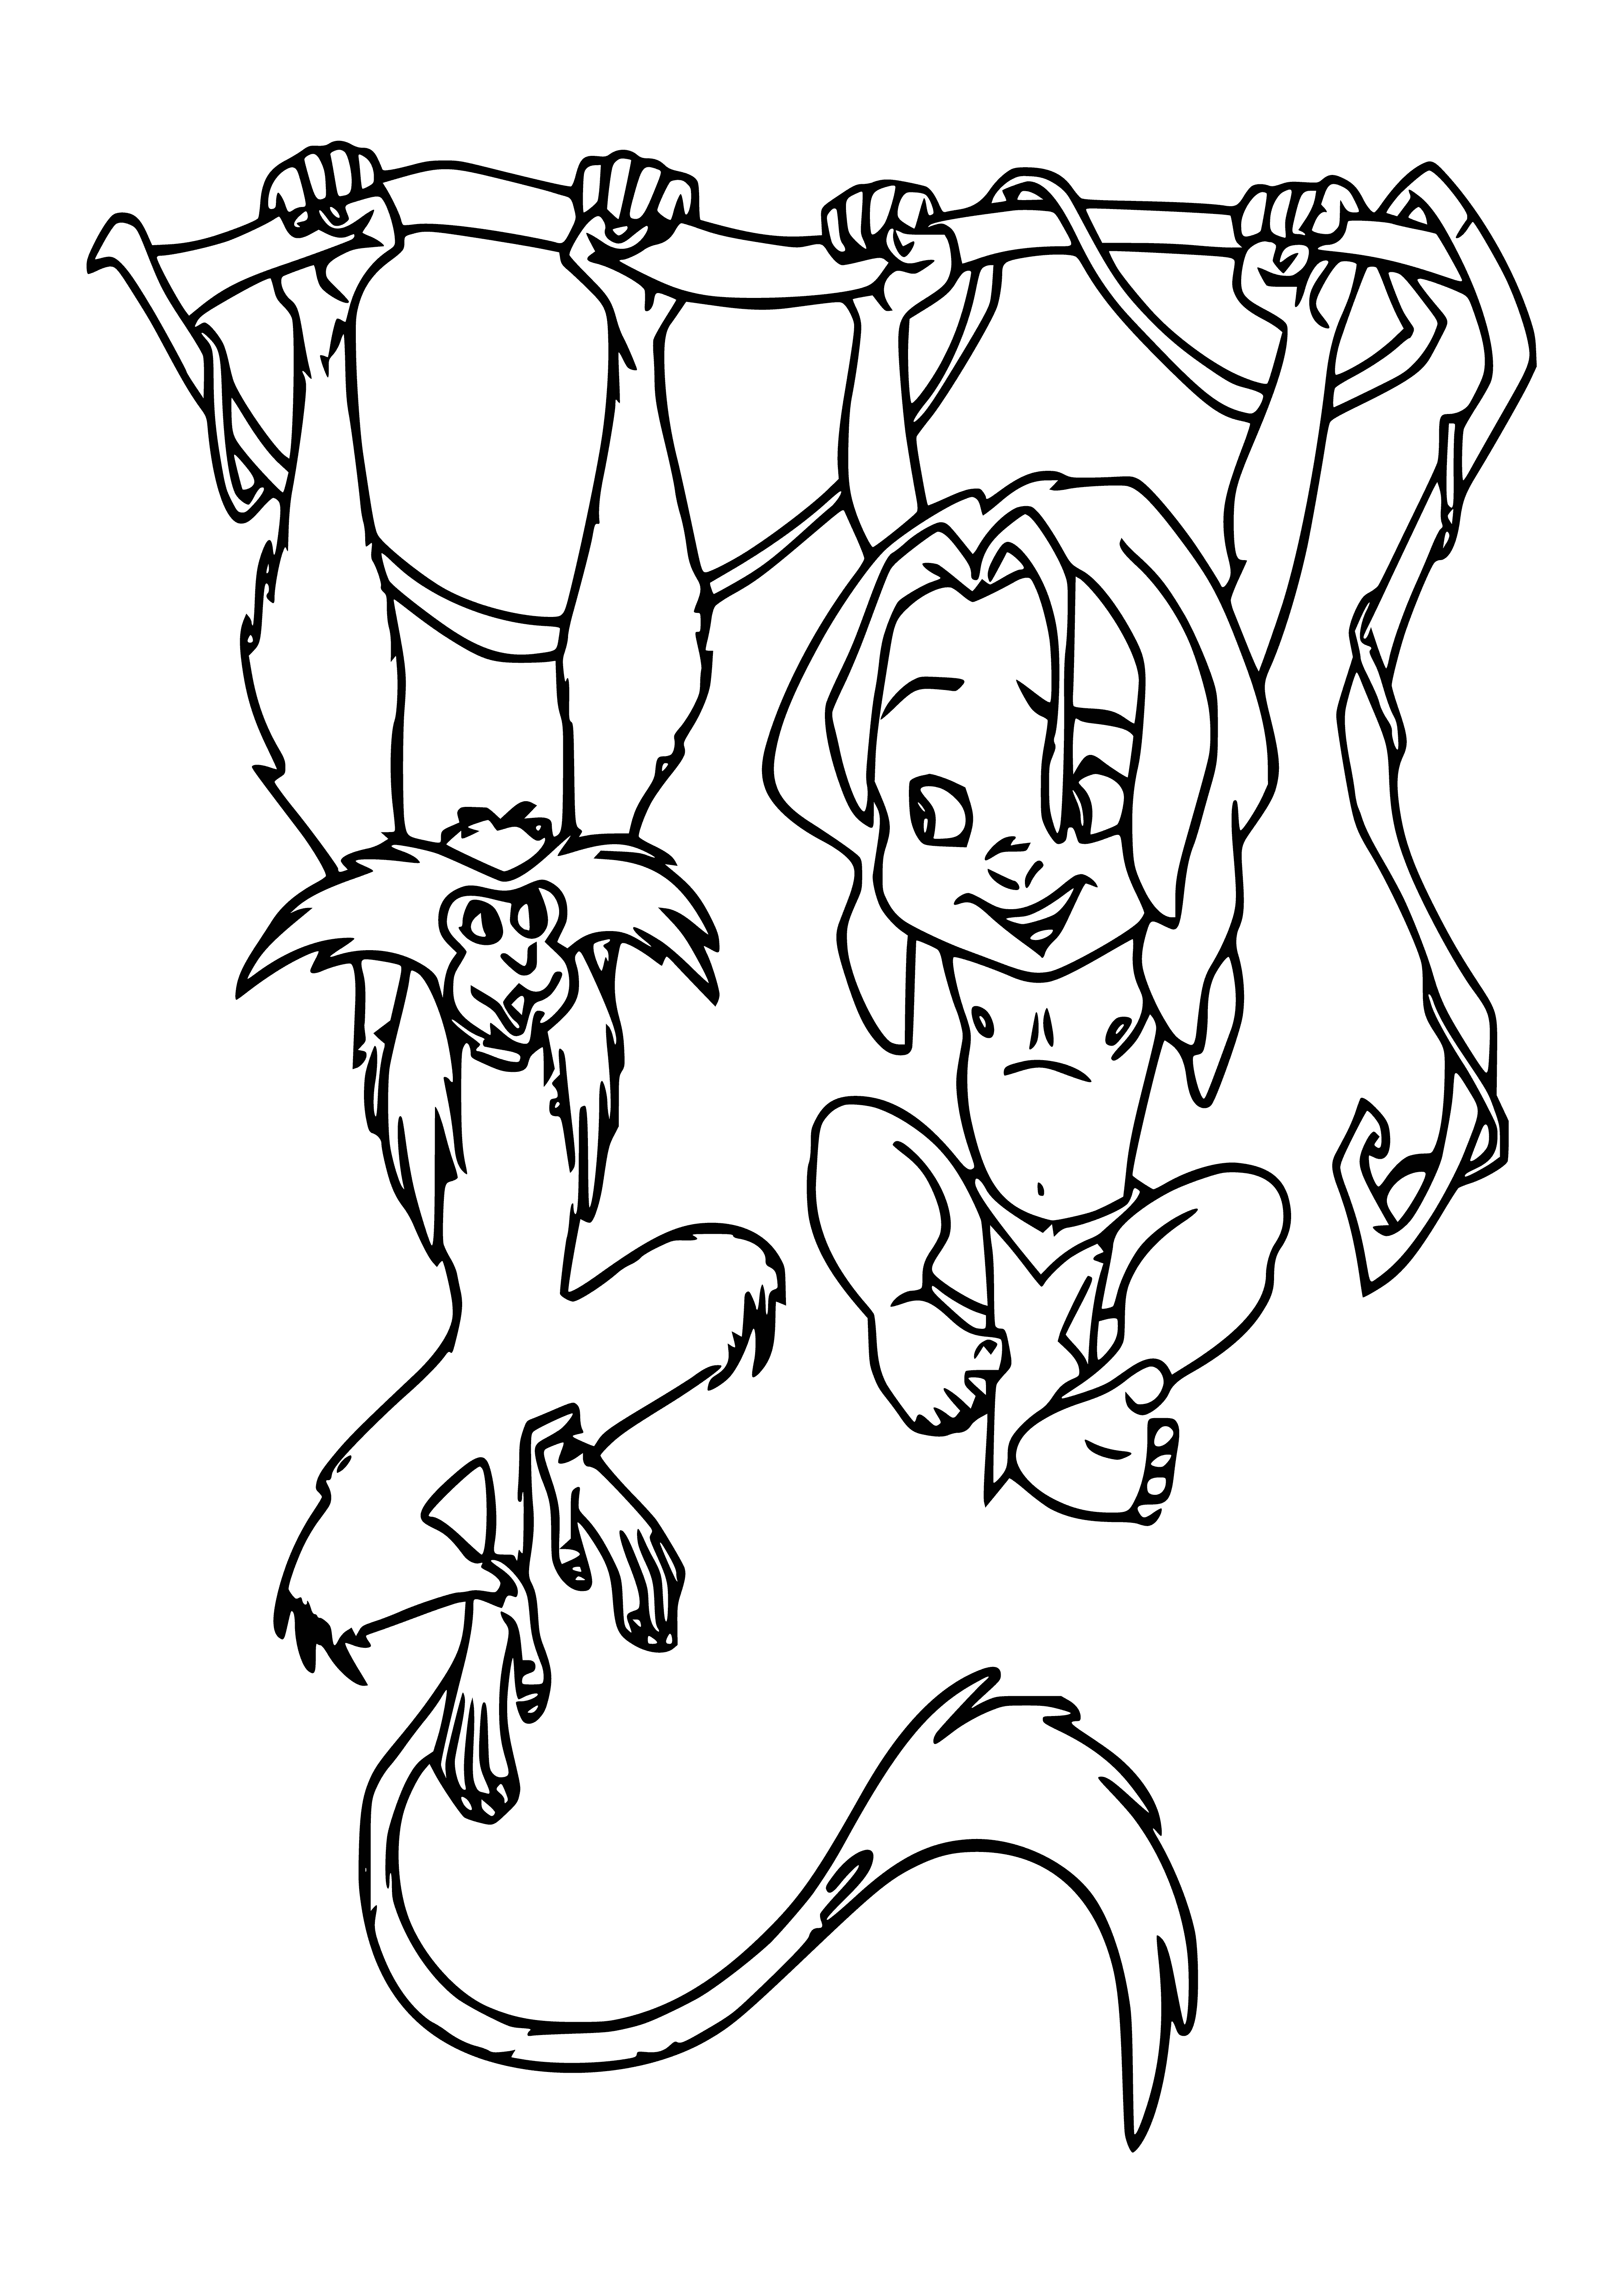 Tarzan and the monkey on the vine coloring page